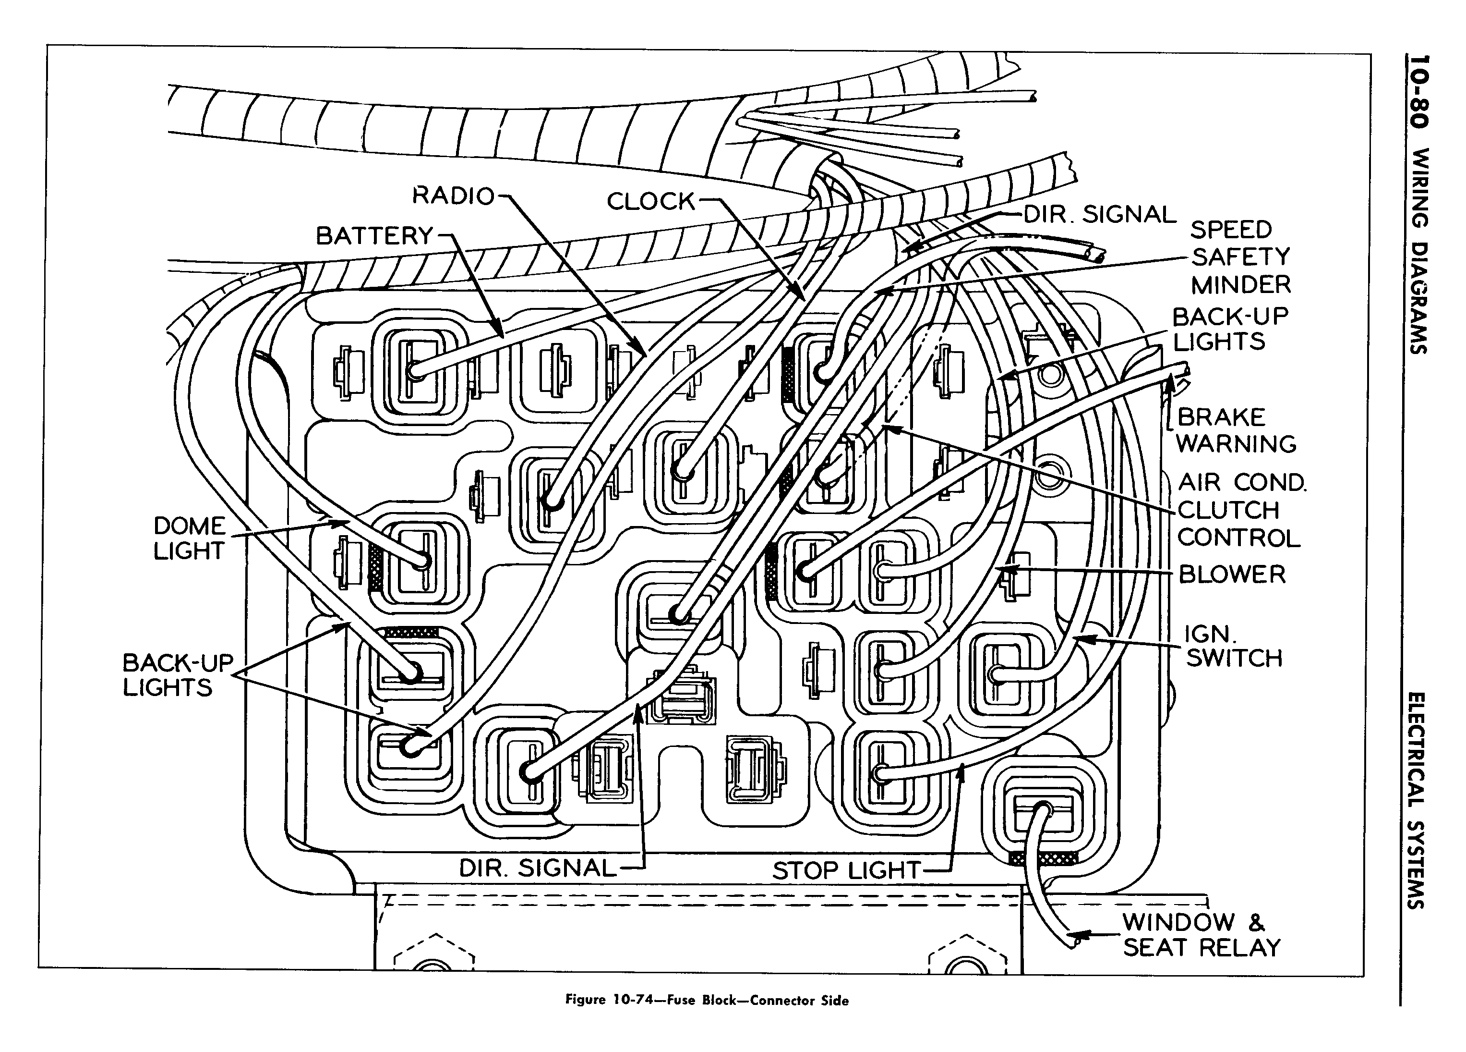 n_11 1957 Buick Shop Manual - Electrical Systems-080-080.jpg